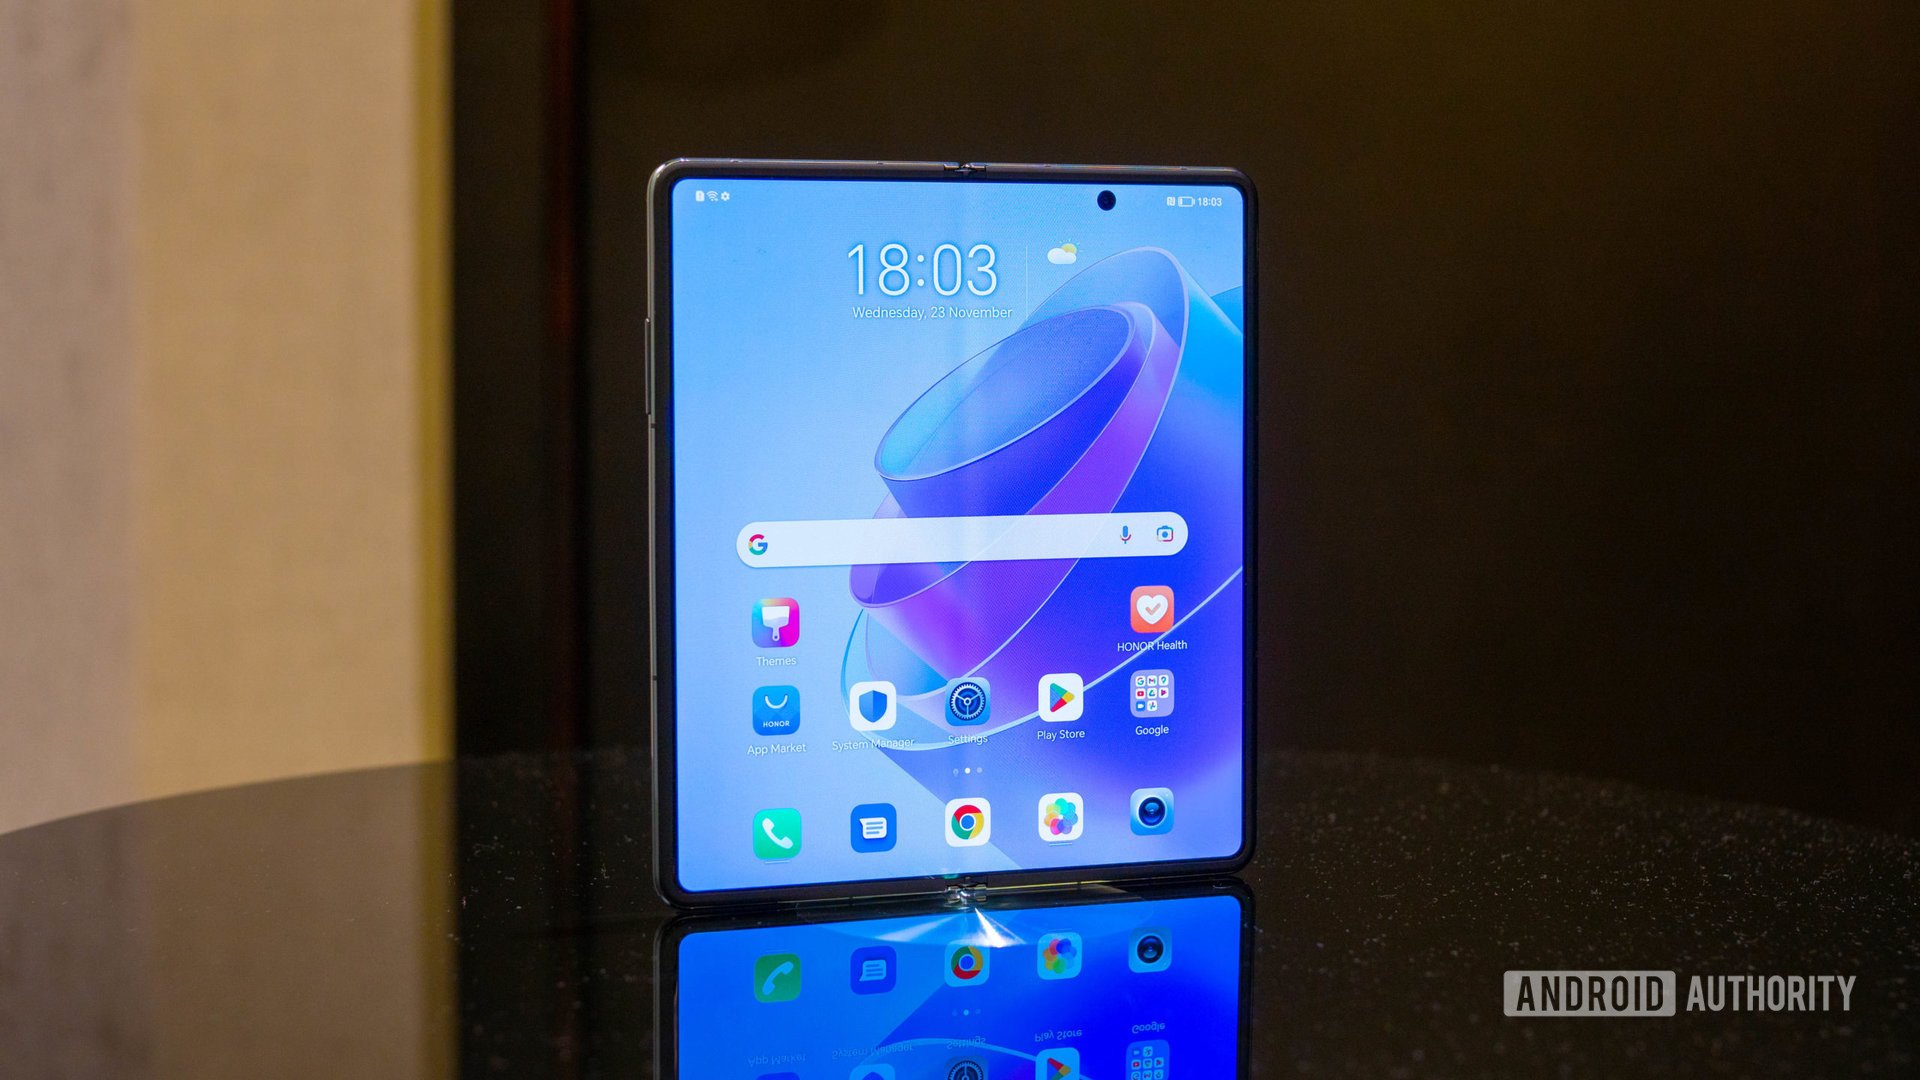 Honor Magic Vs home screen on open internal display standing on a table